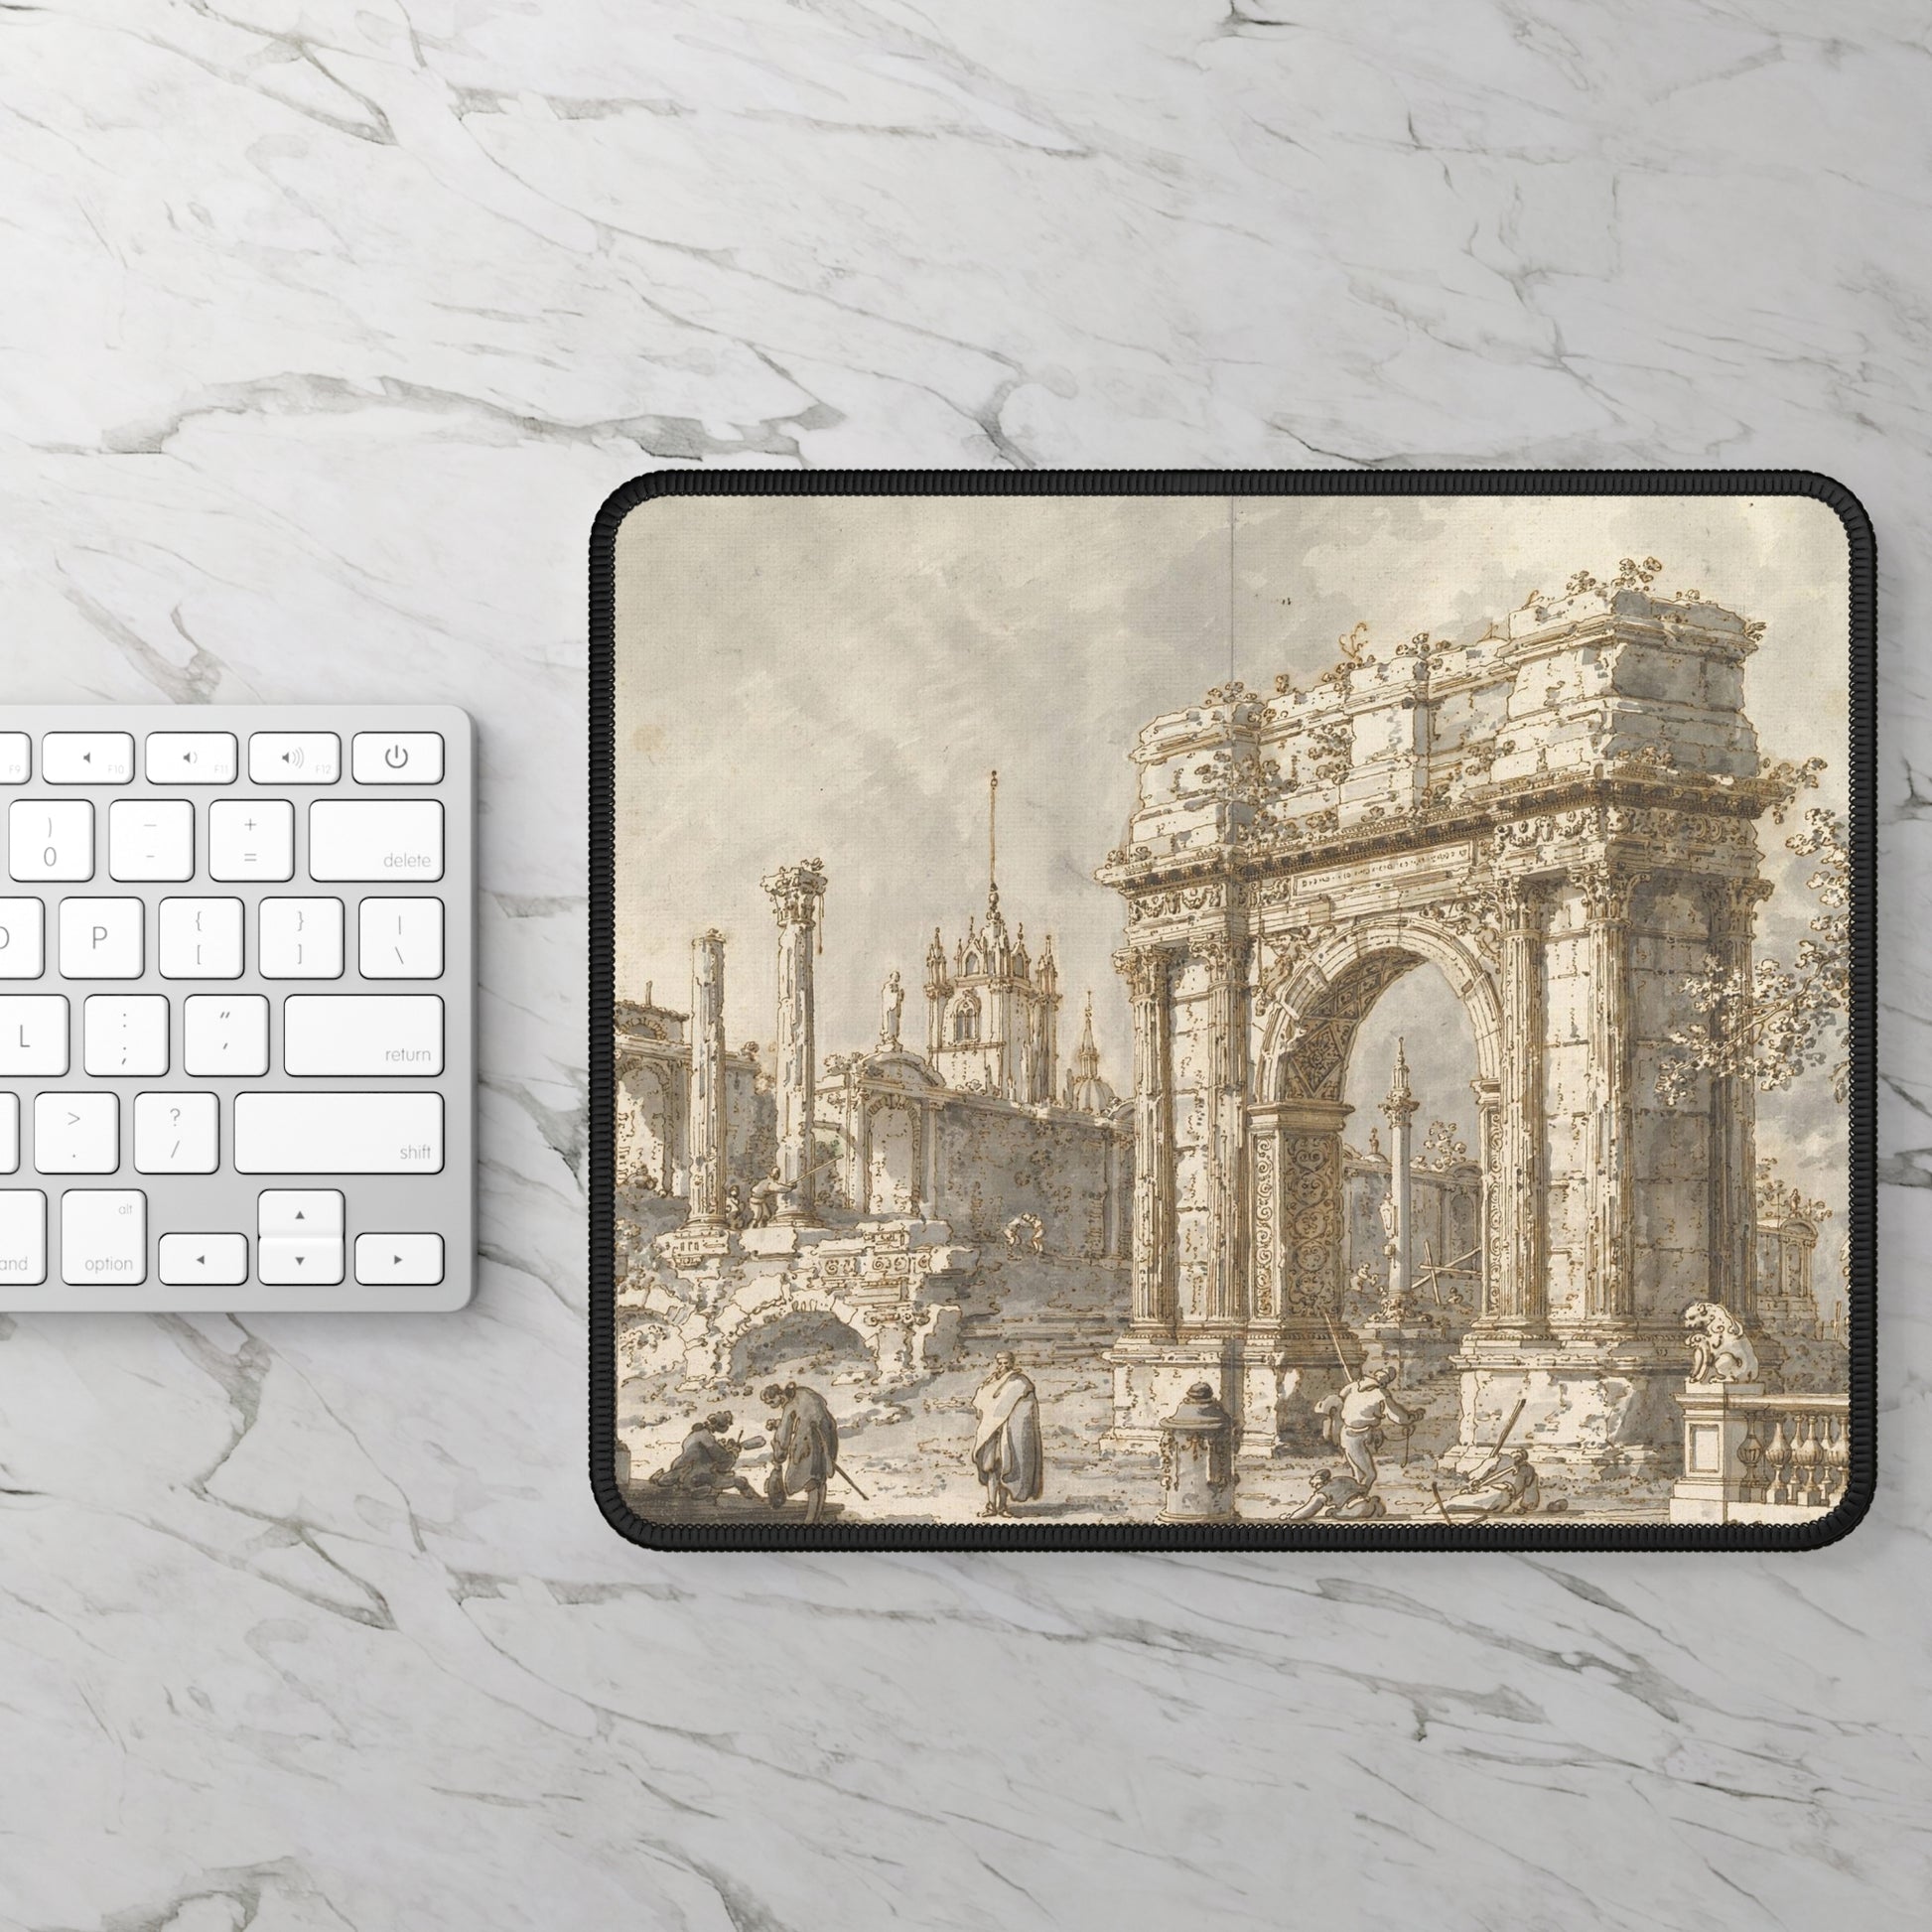 CANALETTO - CAPRICCIO WITH A ROMAN TRIUMPHAL ARCH - GAMING MOUSE PAD